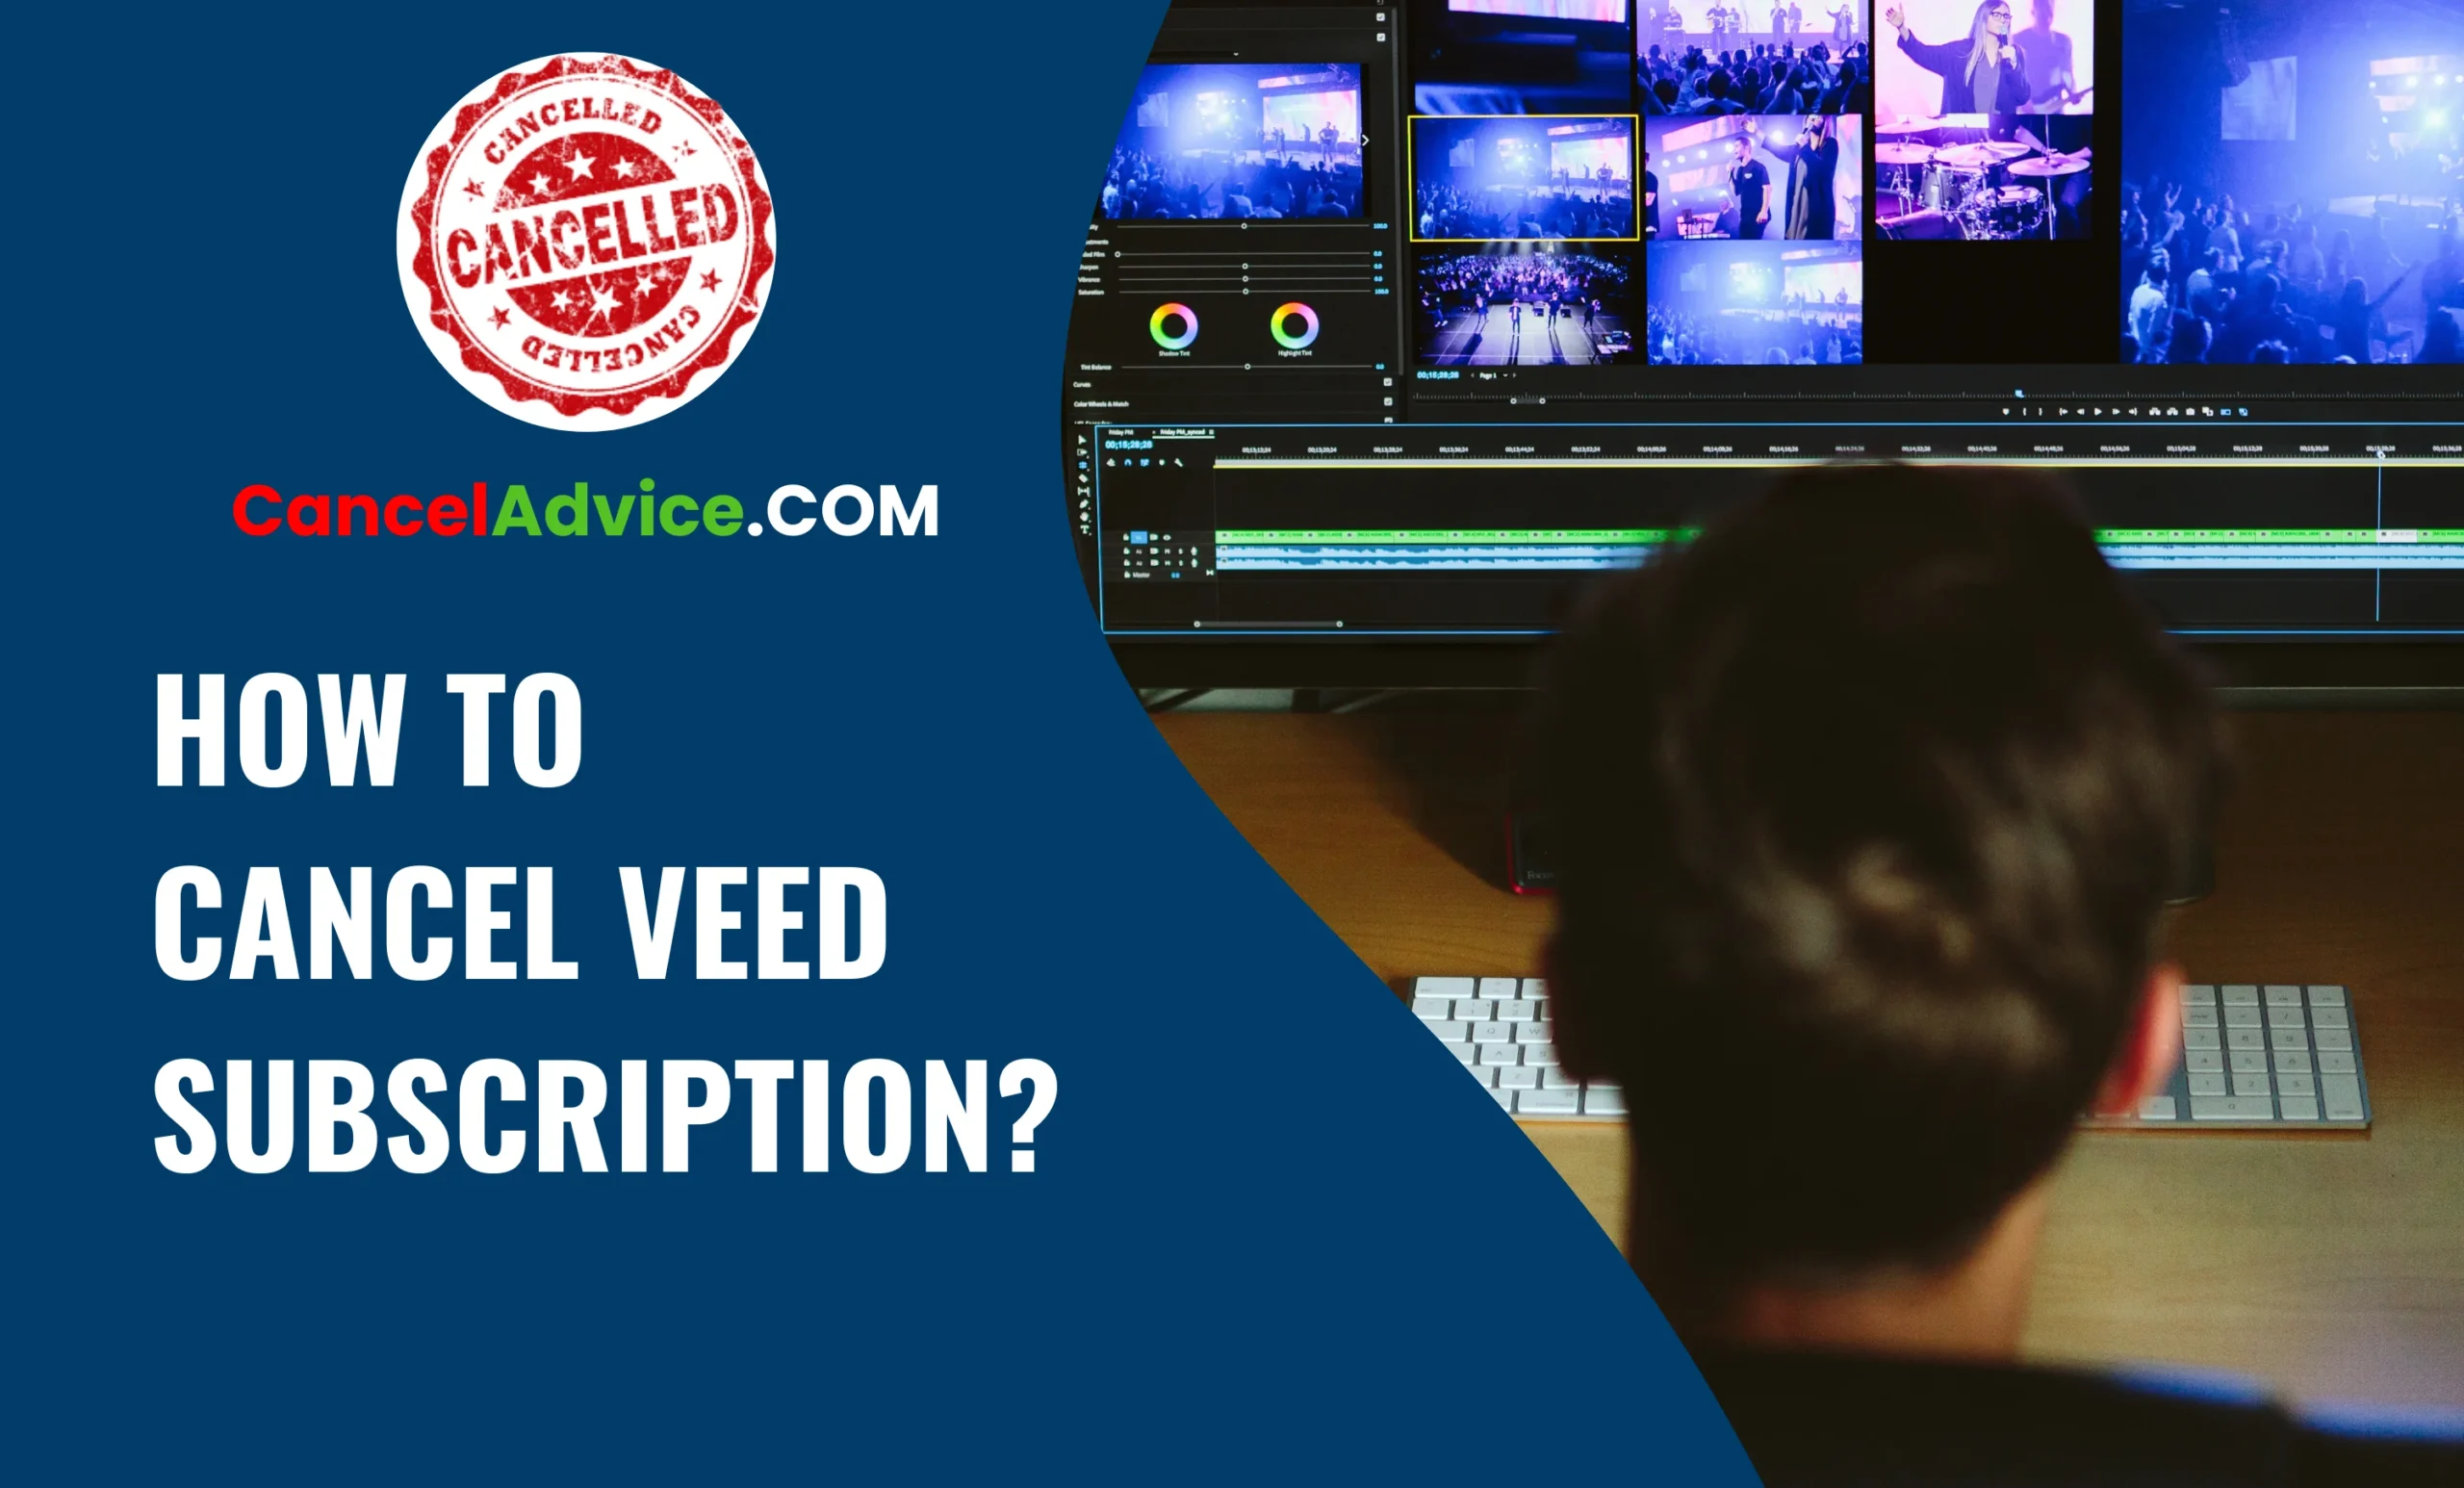 How To Cancel Veed Subscription